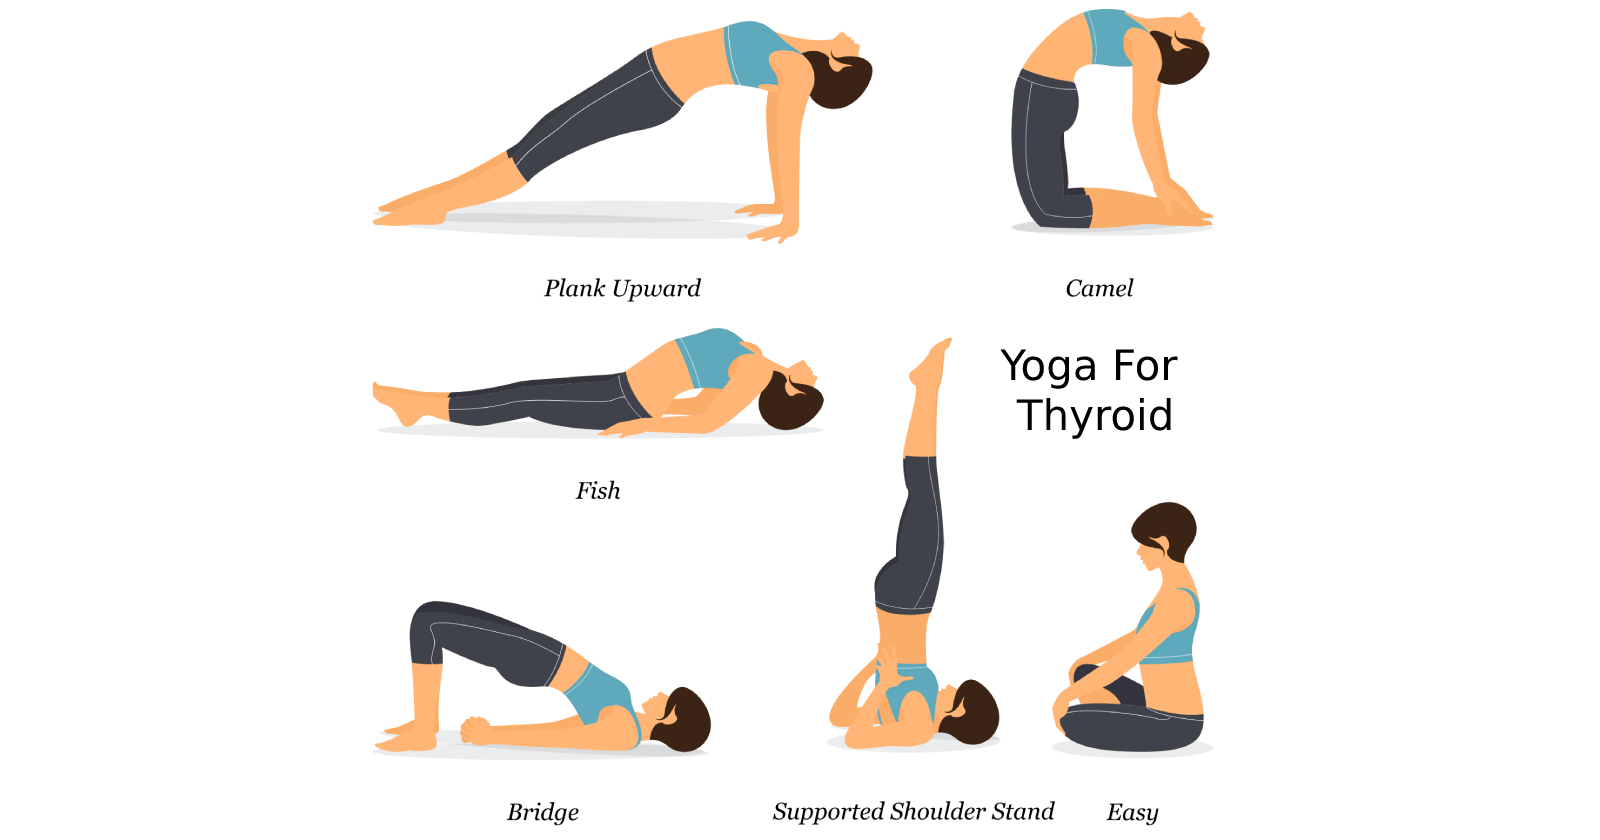 Yoga Poses For The Thyroid Help To Ease Problems.